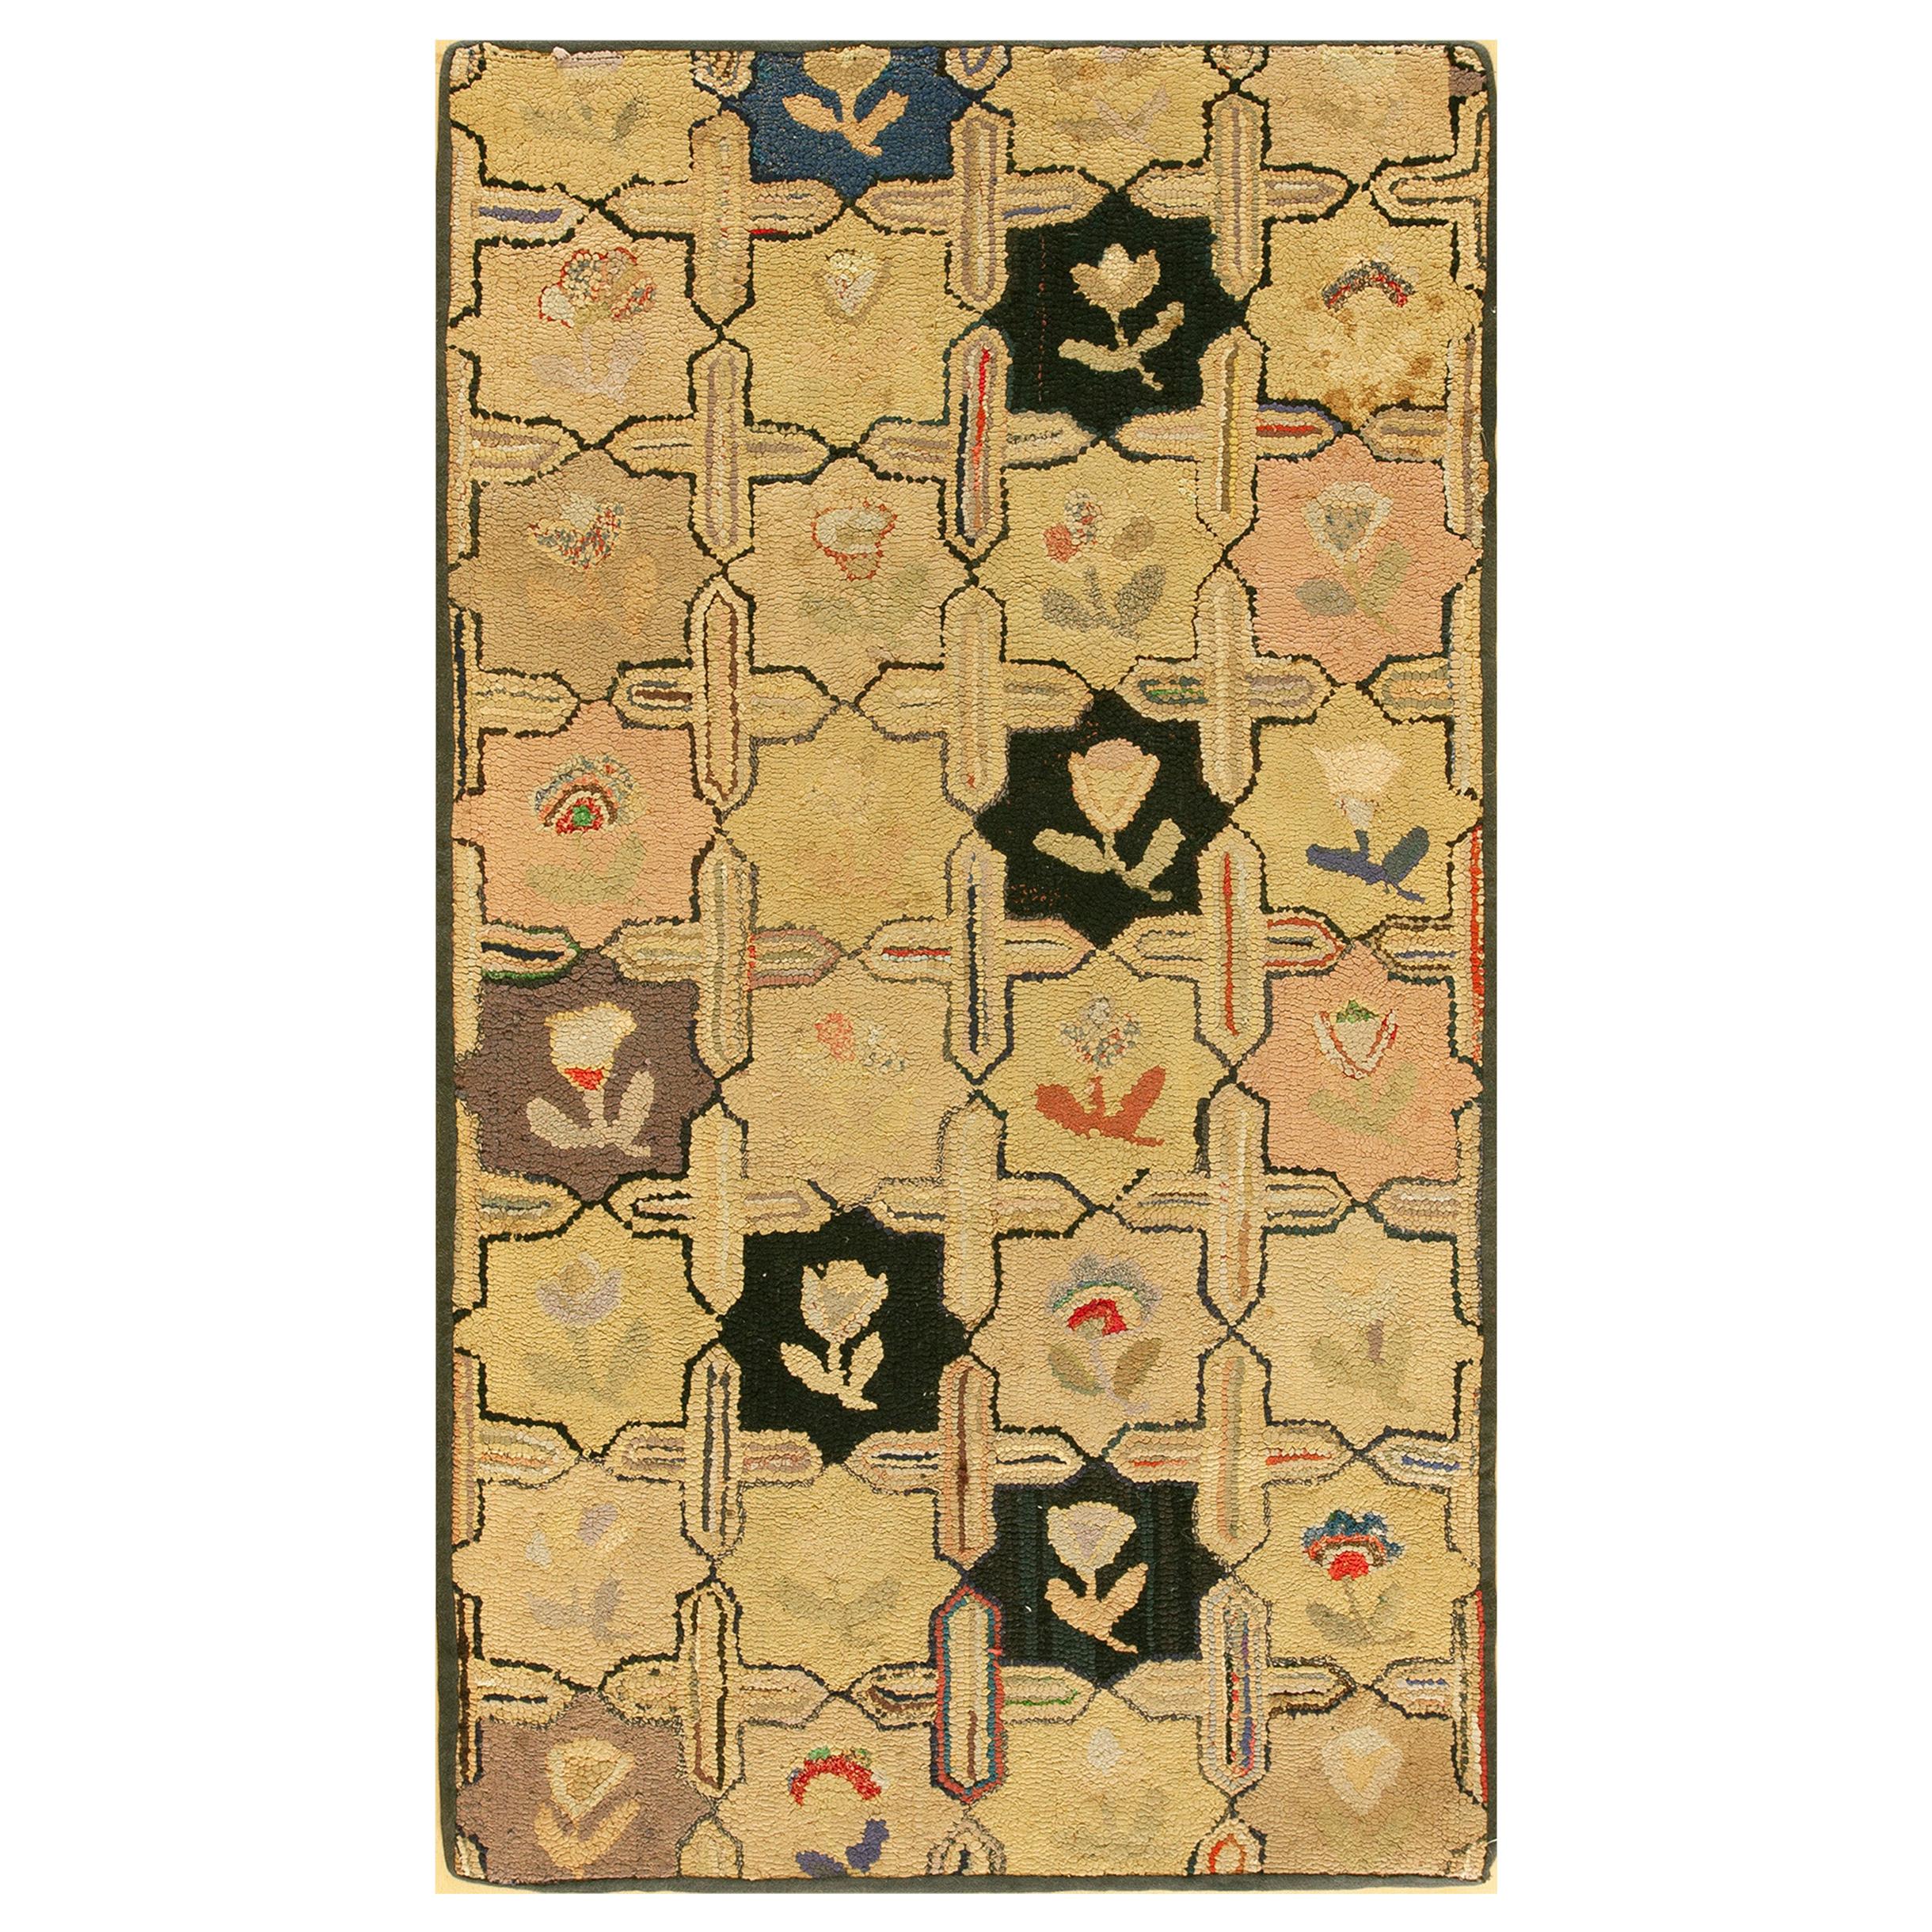 Early 20th Century American Hooked Rug ( 2'5" x 4'3" - 74 x 130 )